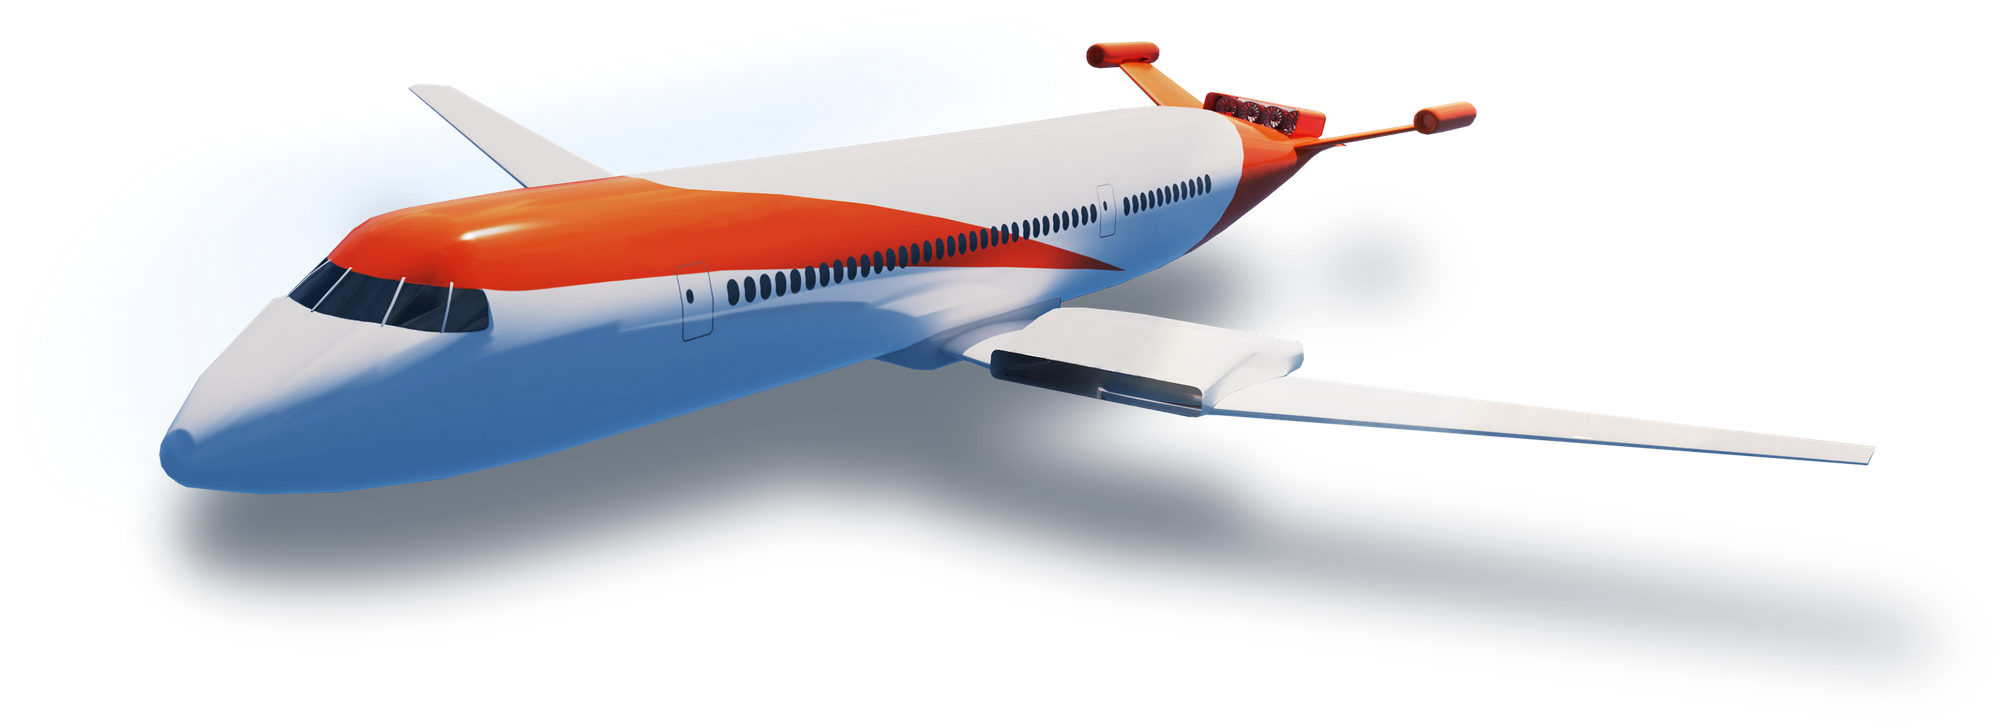 CG render of a plane using Wright's engines